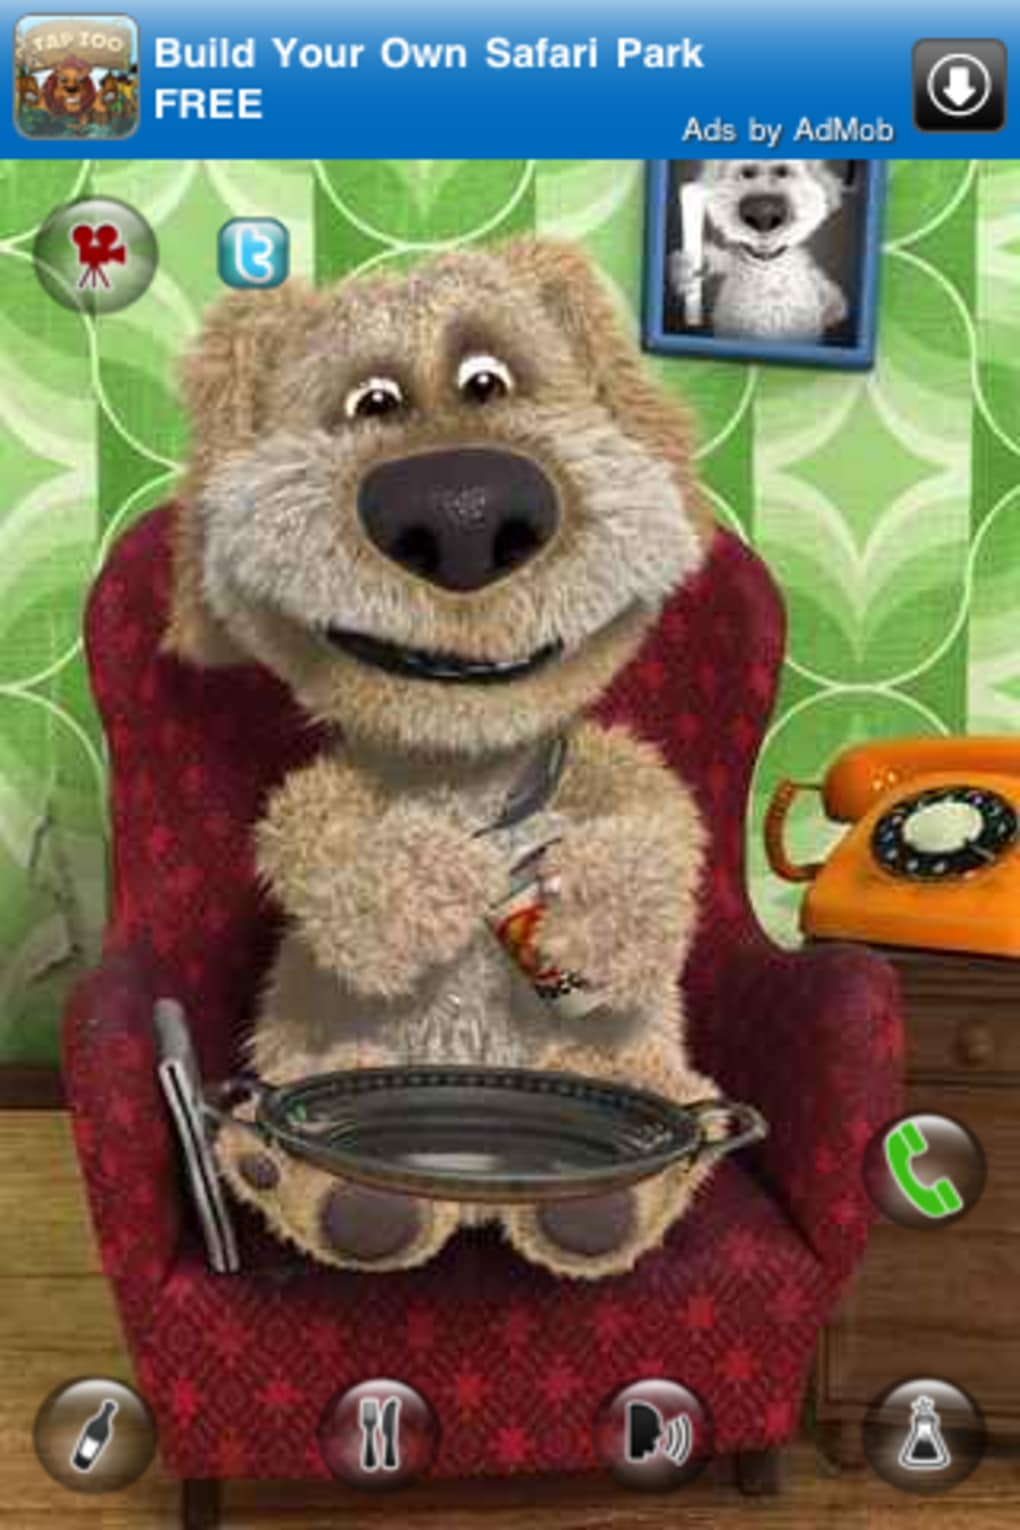 Free Talking Ben the Dog for iPad Software Download